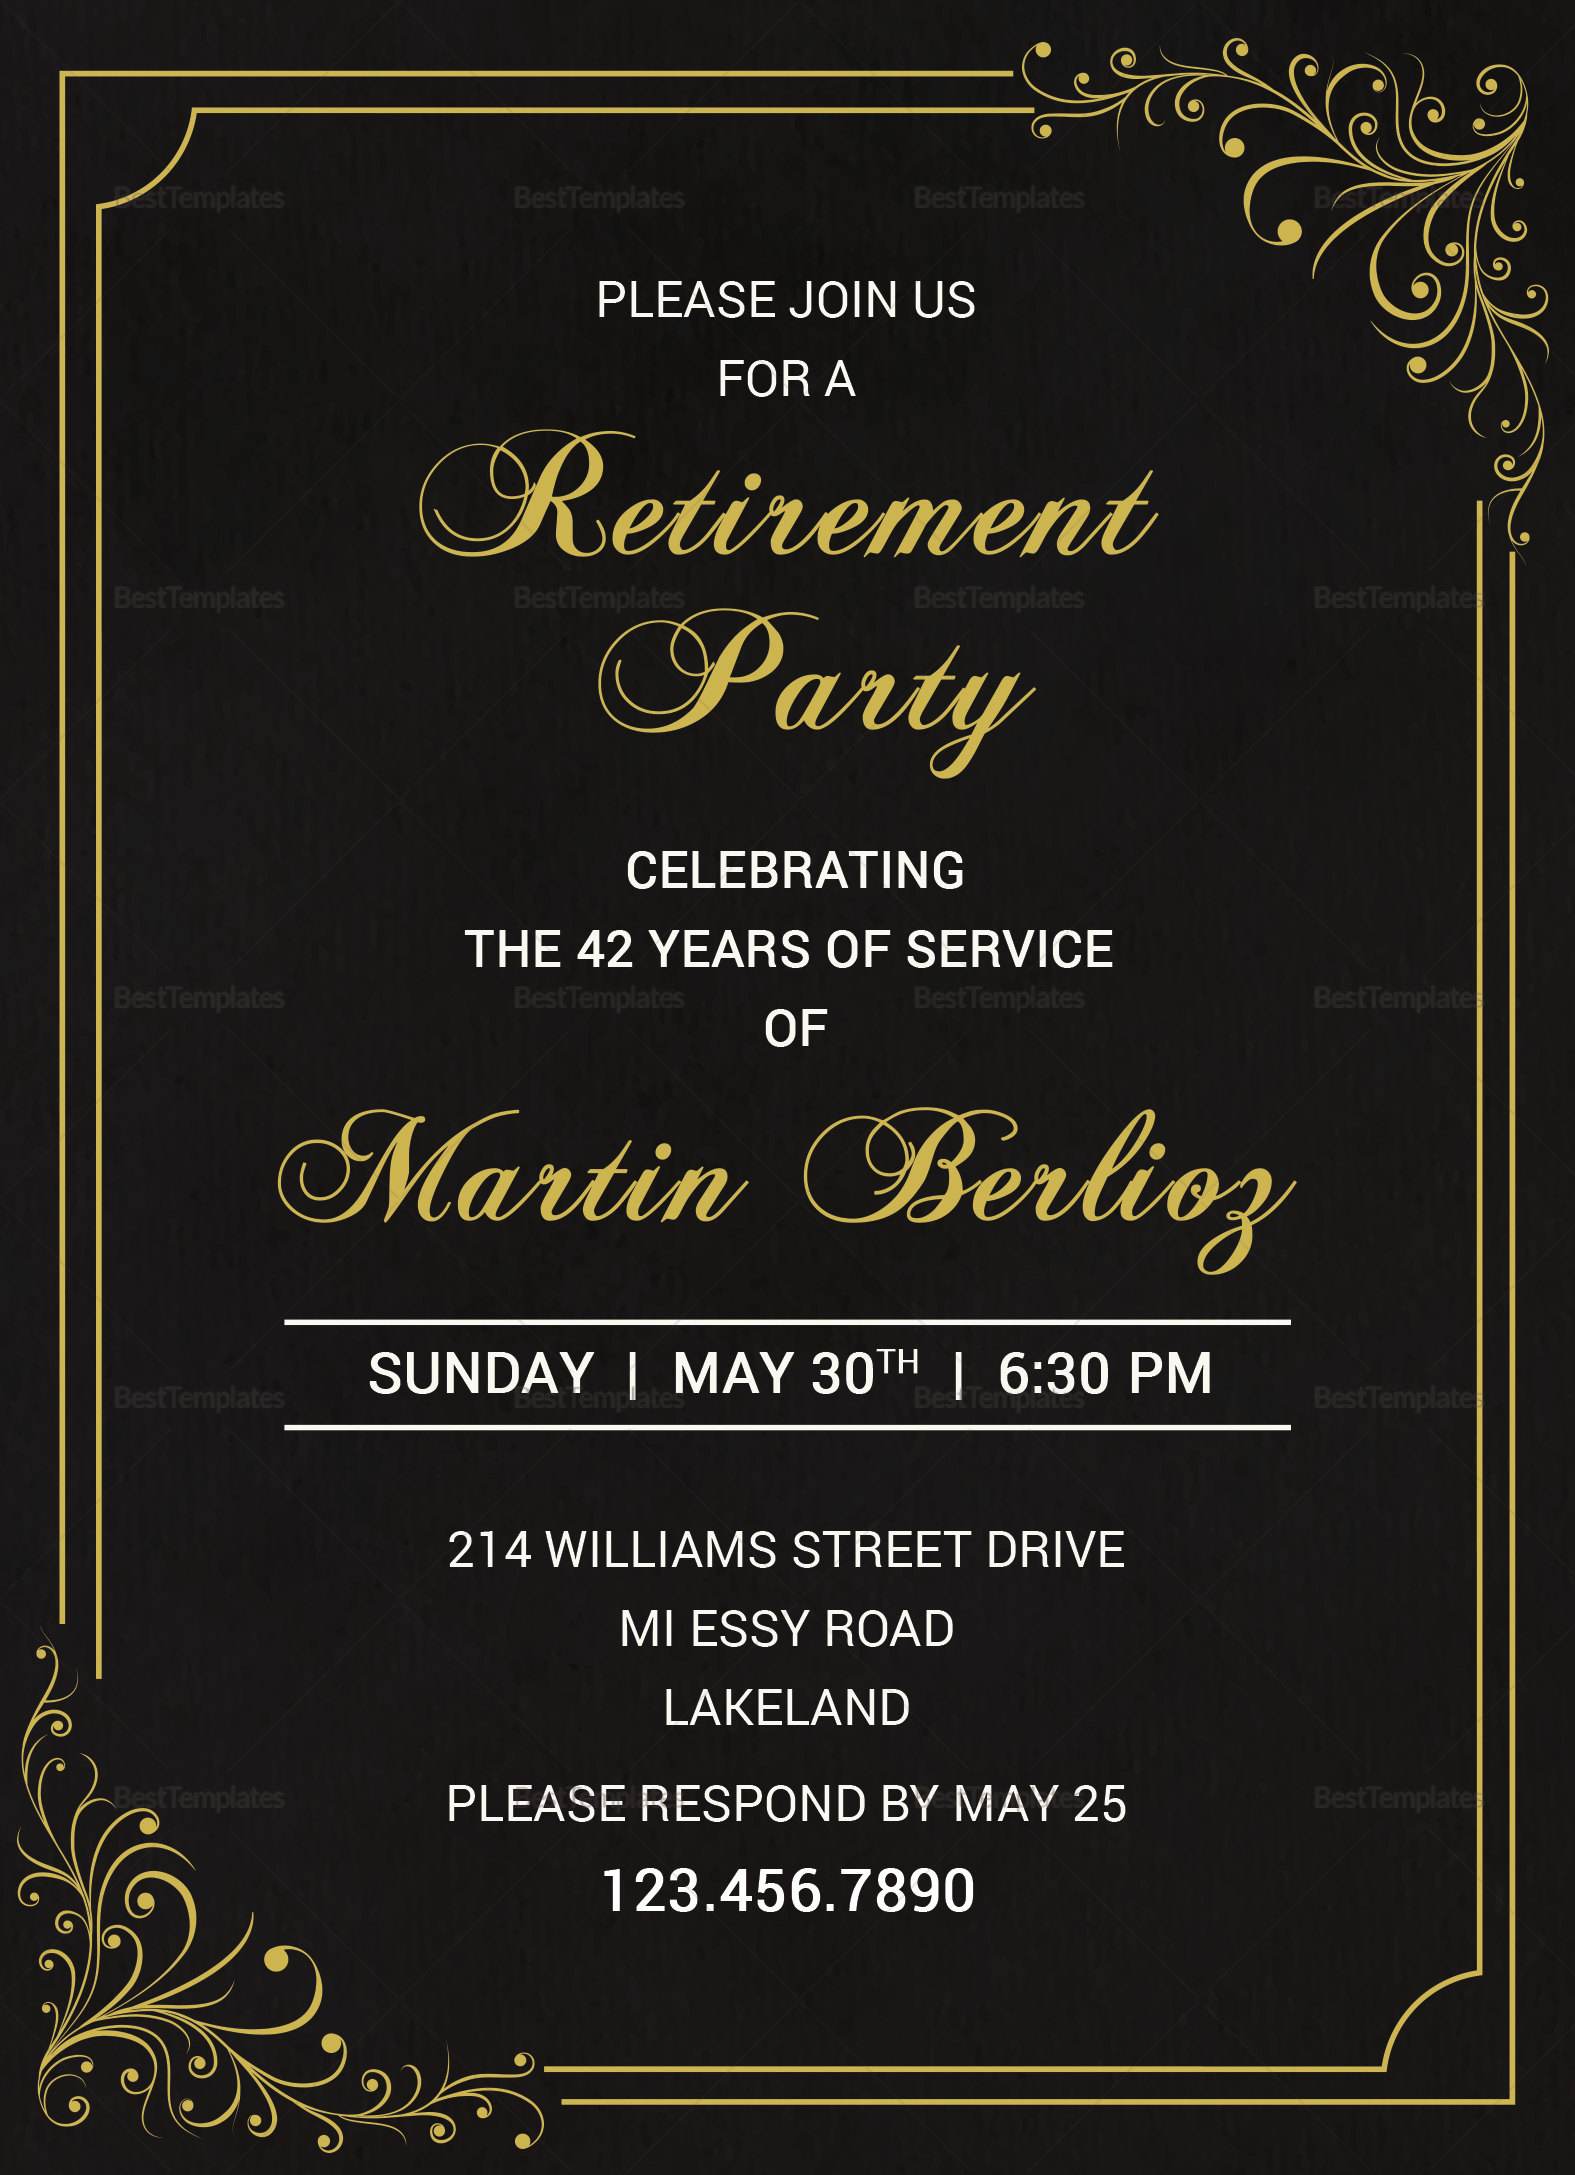 pool-party-invitations-party-invite-template-retirement-party-invitations-retirement